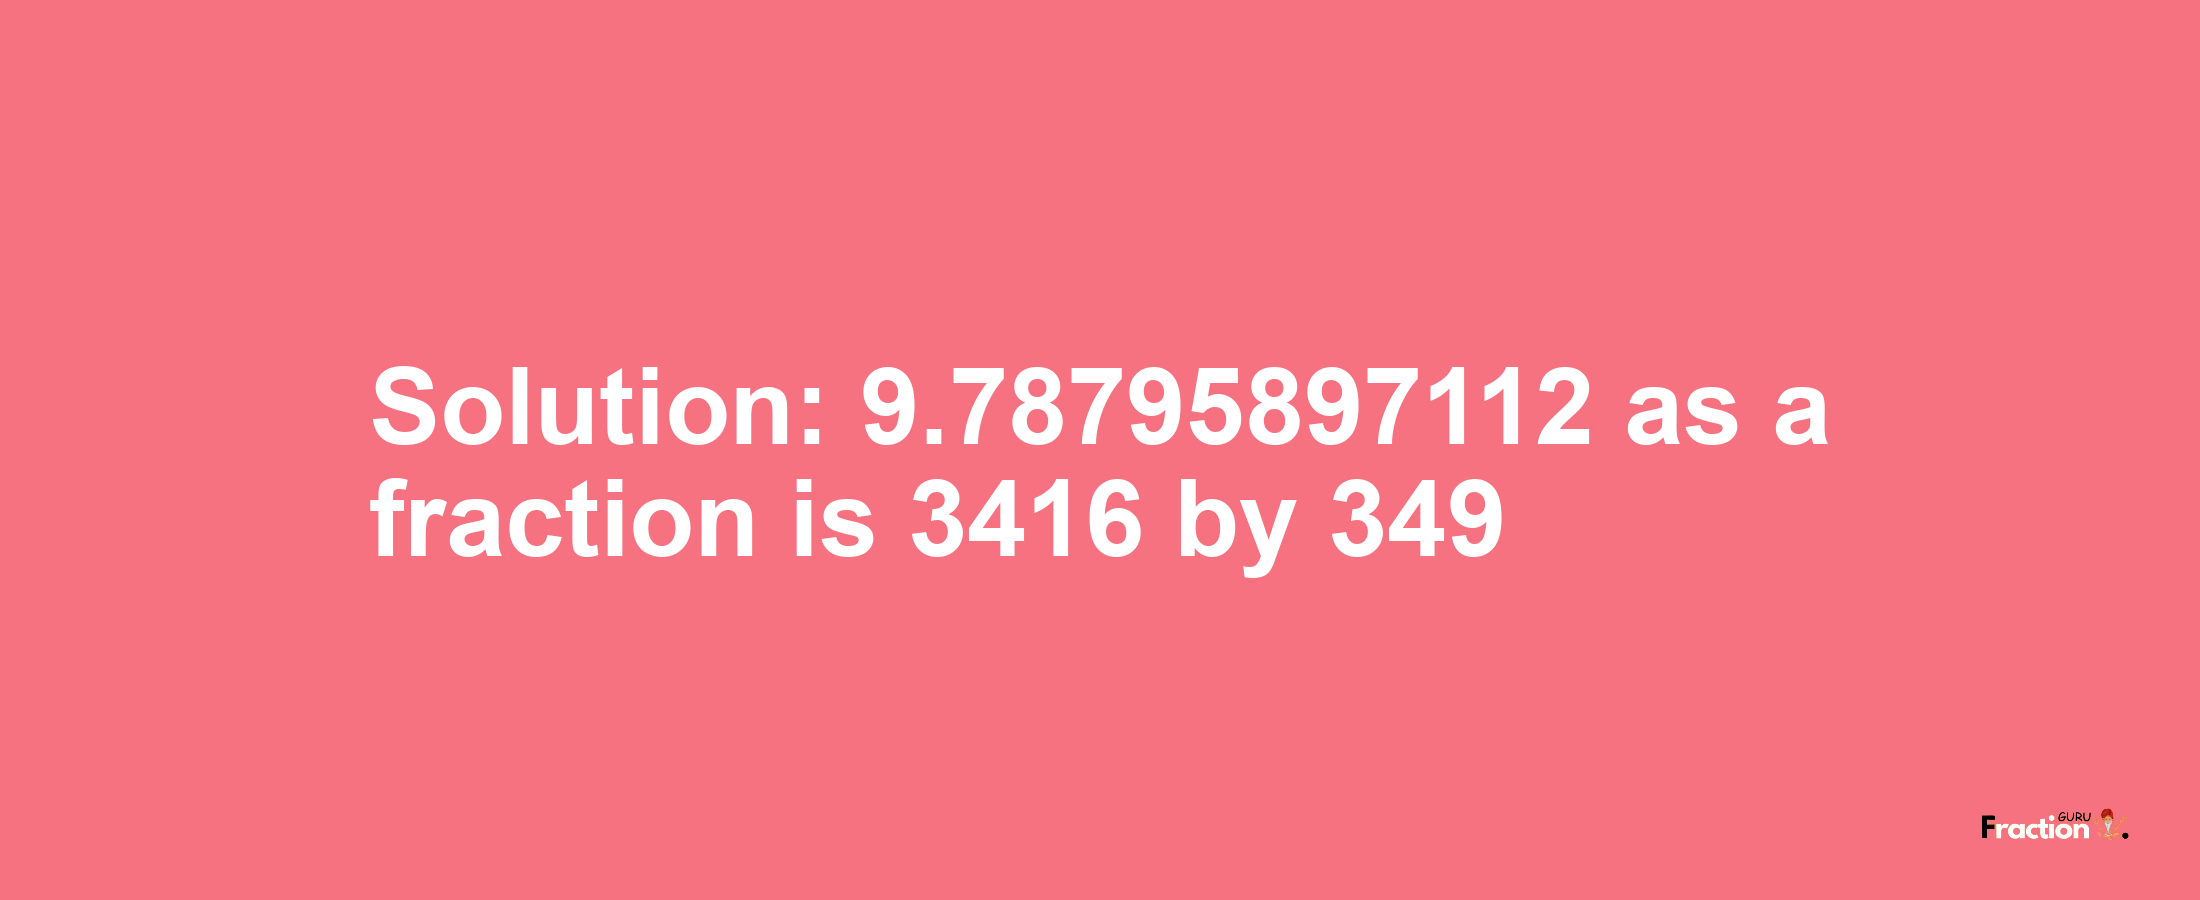 Solution:9.78795897112 as a fraction is 3416/349